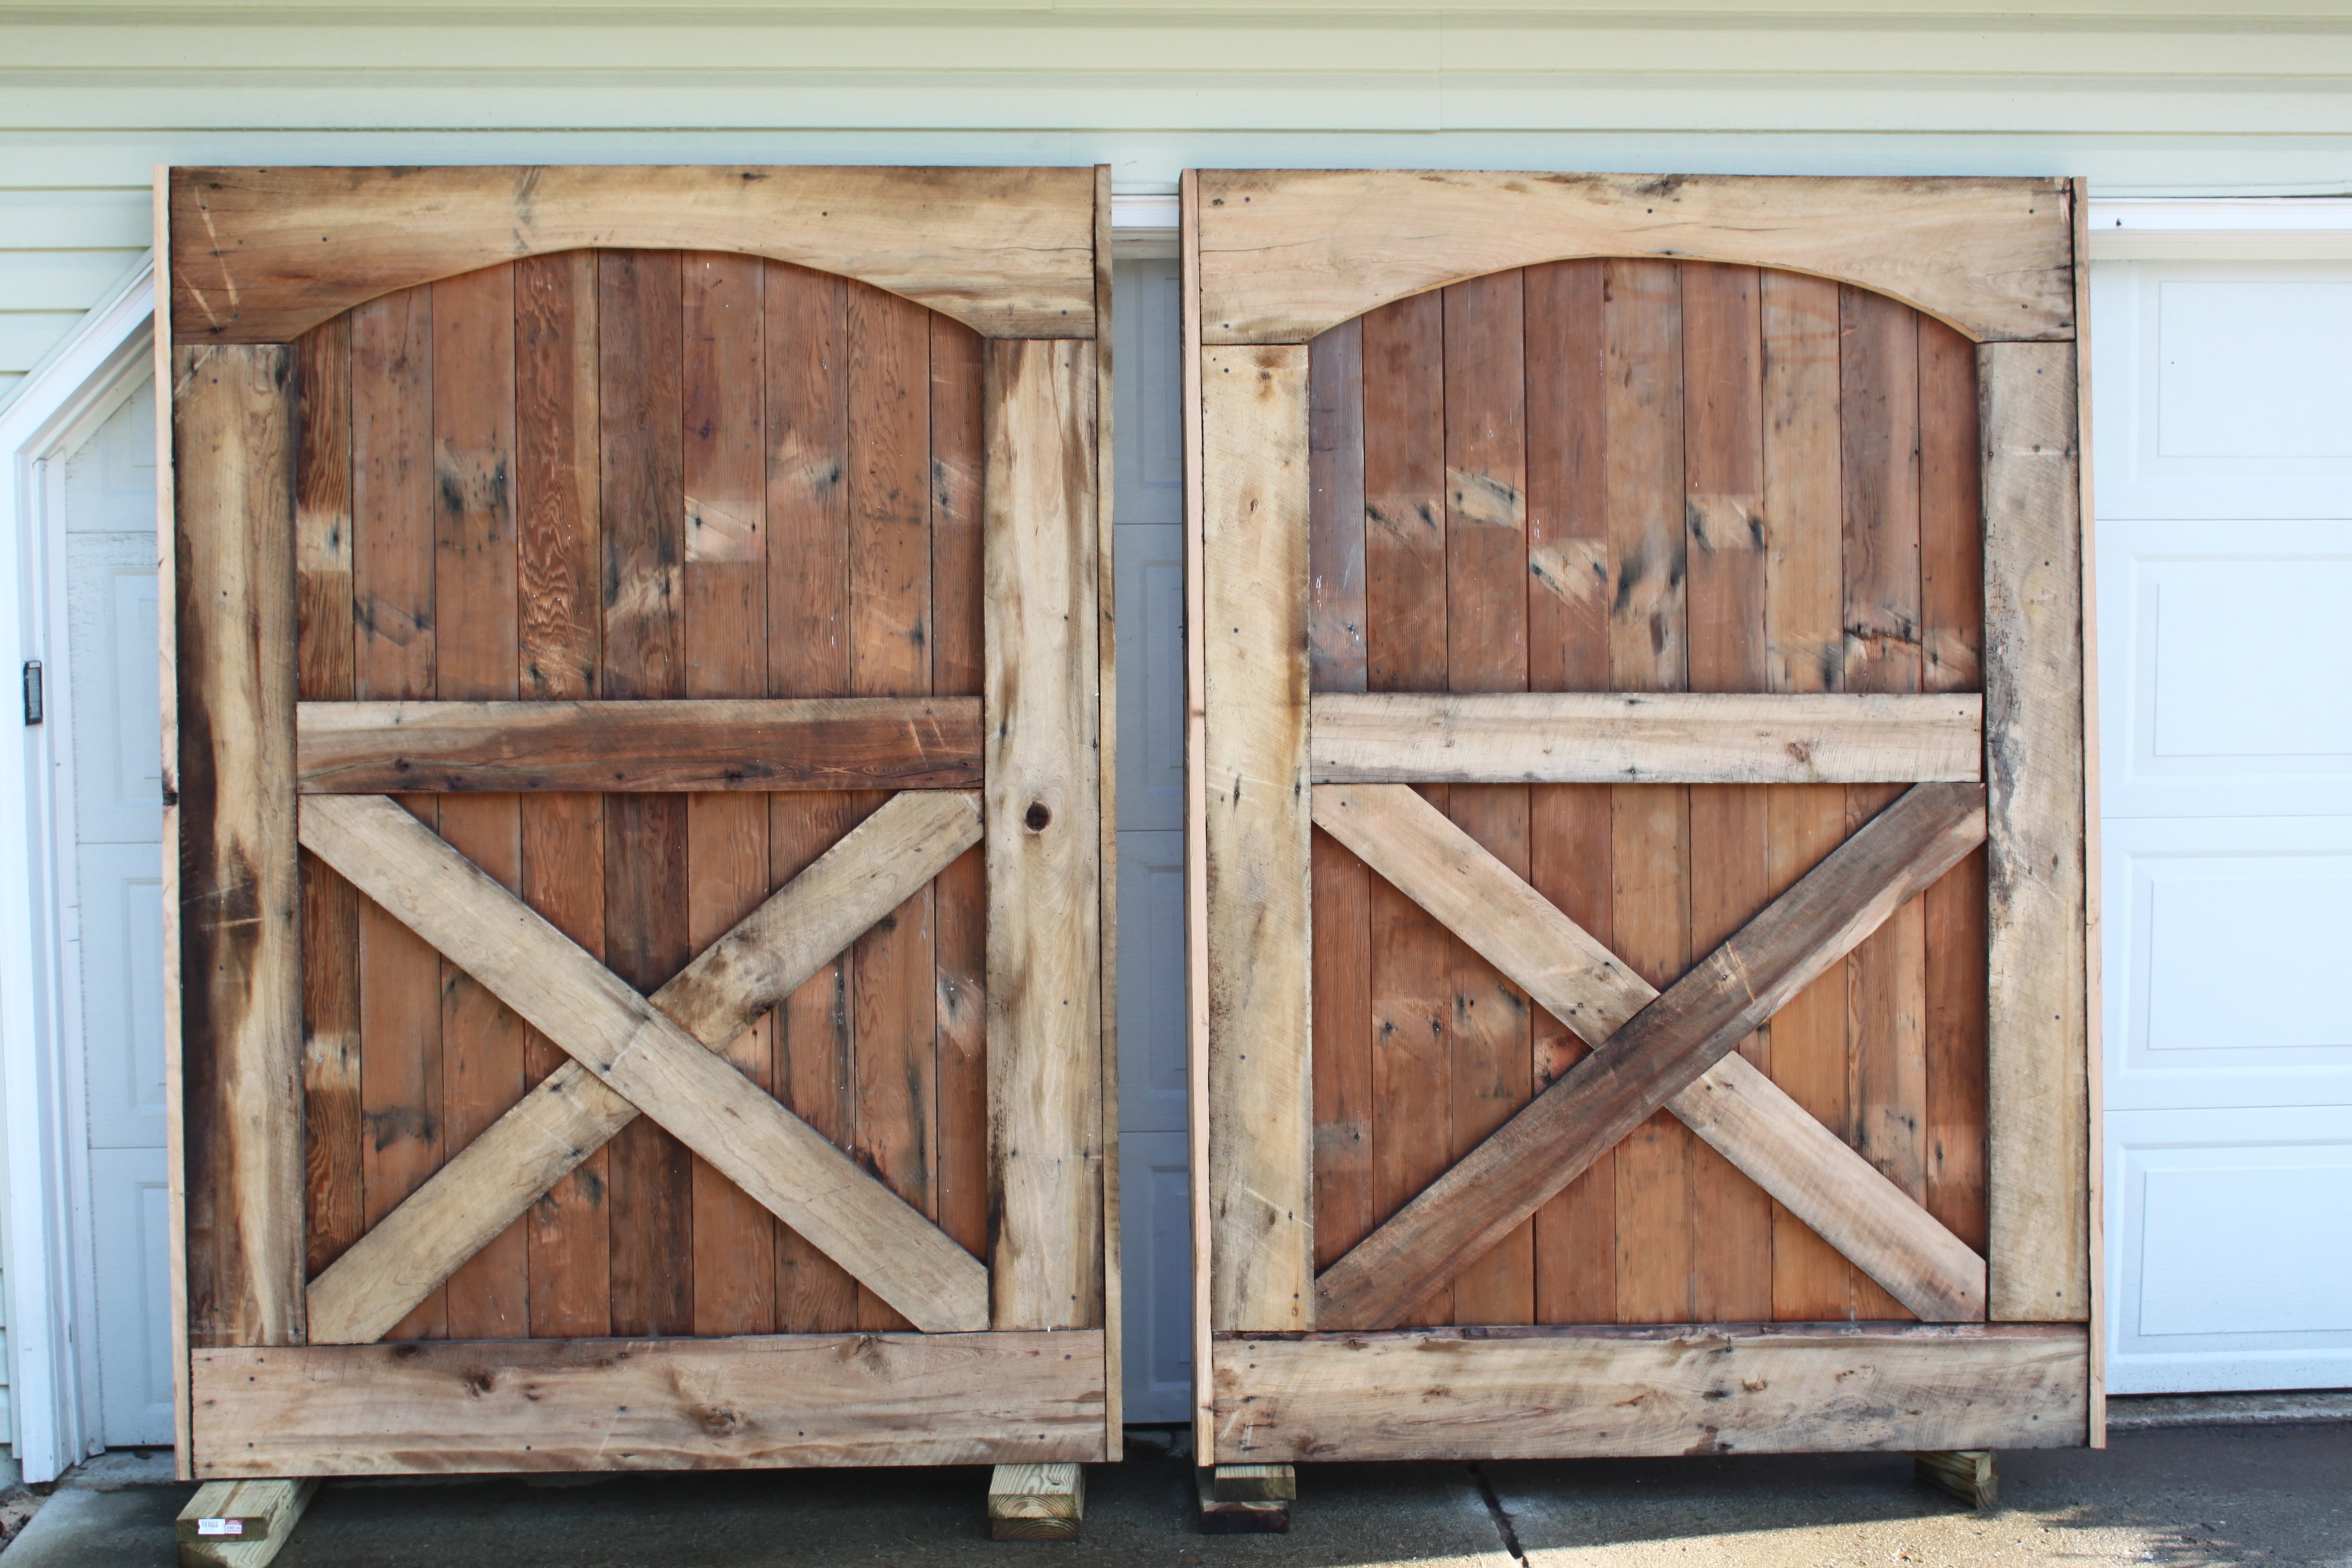 barn our recaimed door  using the diy projects doors headboard of One our first  building  of